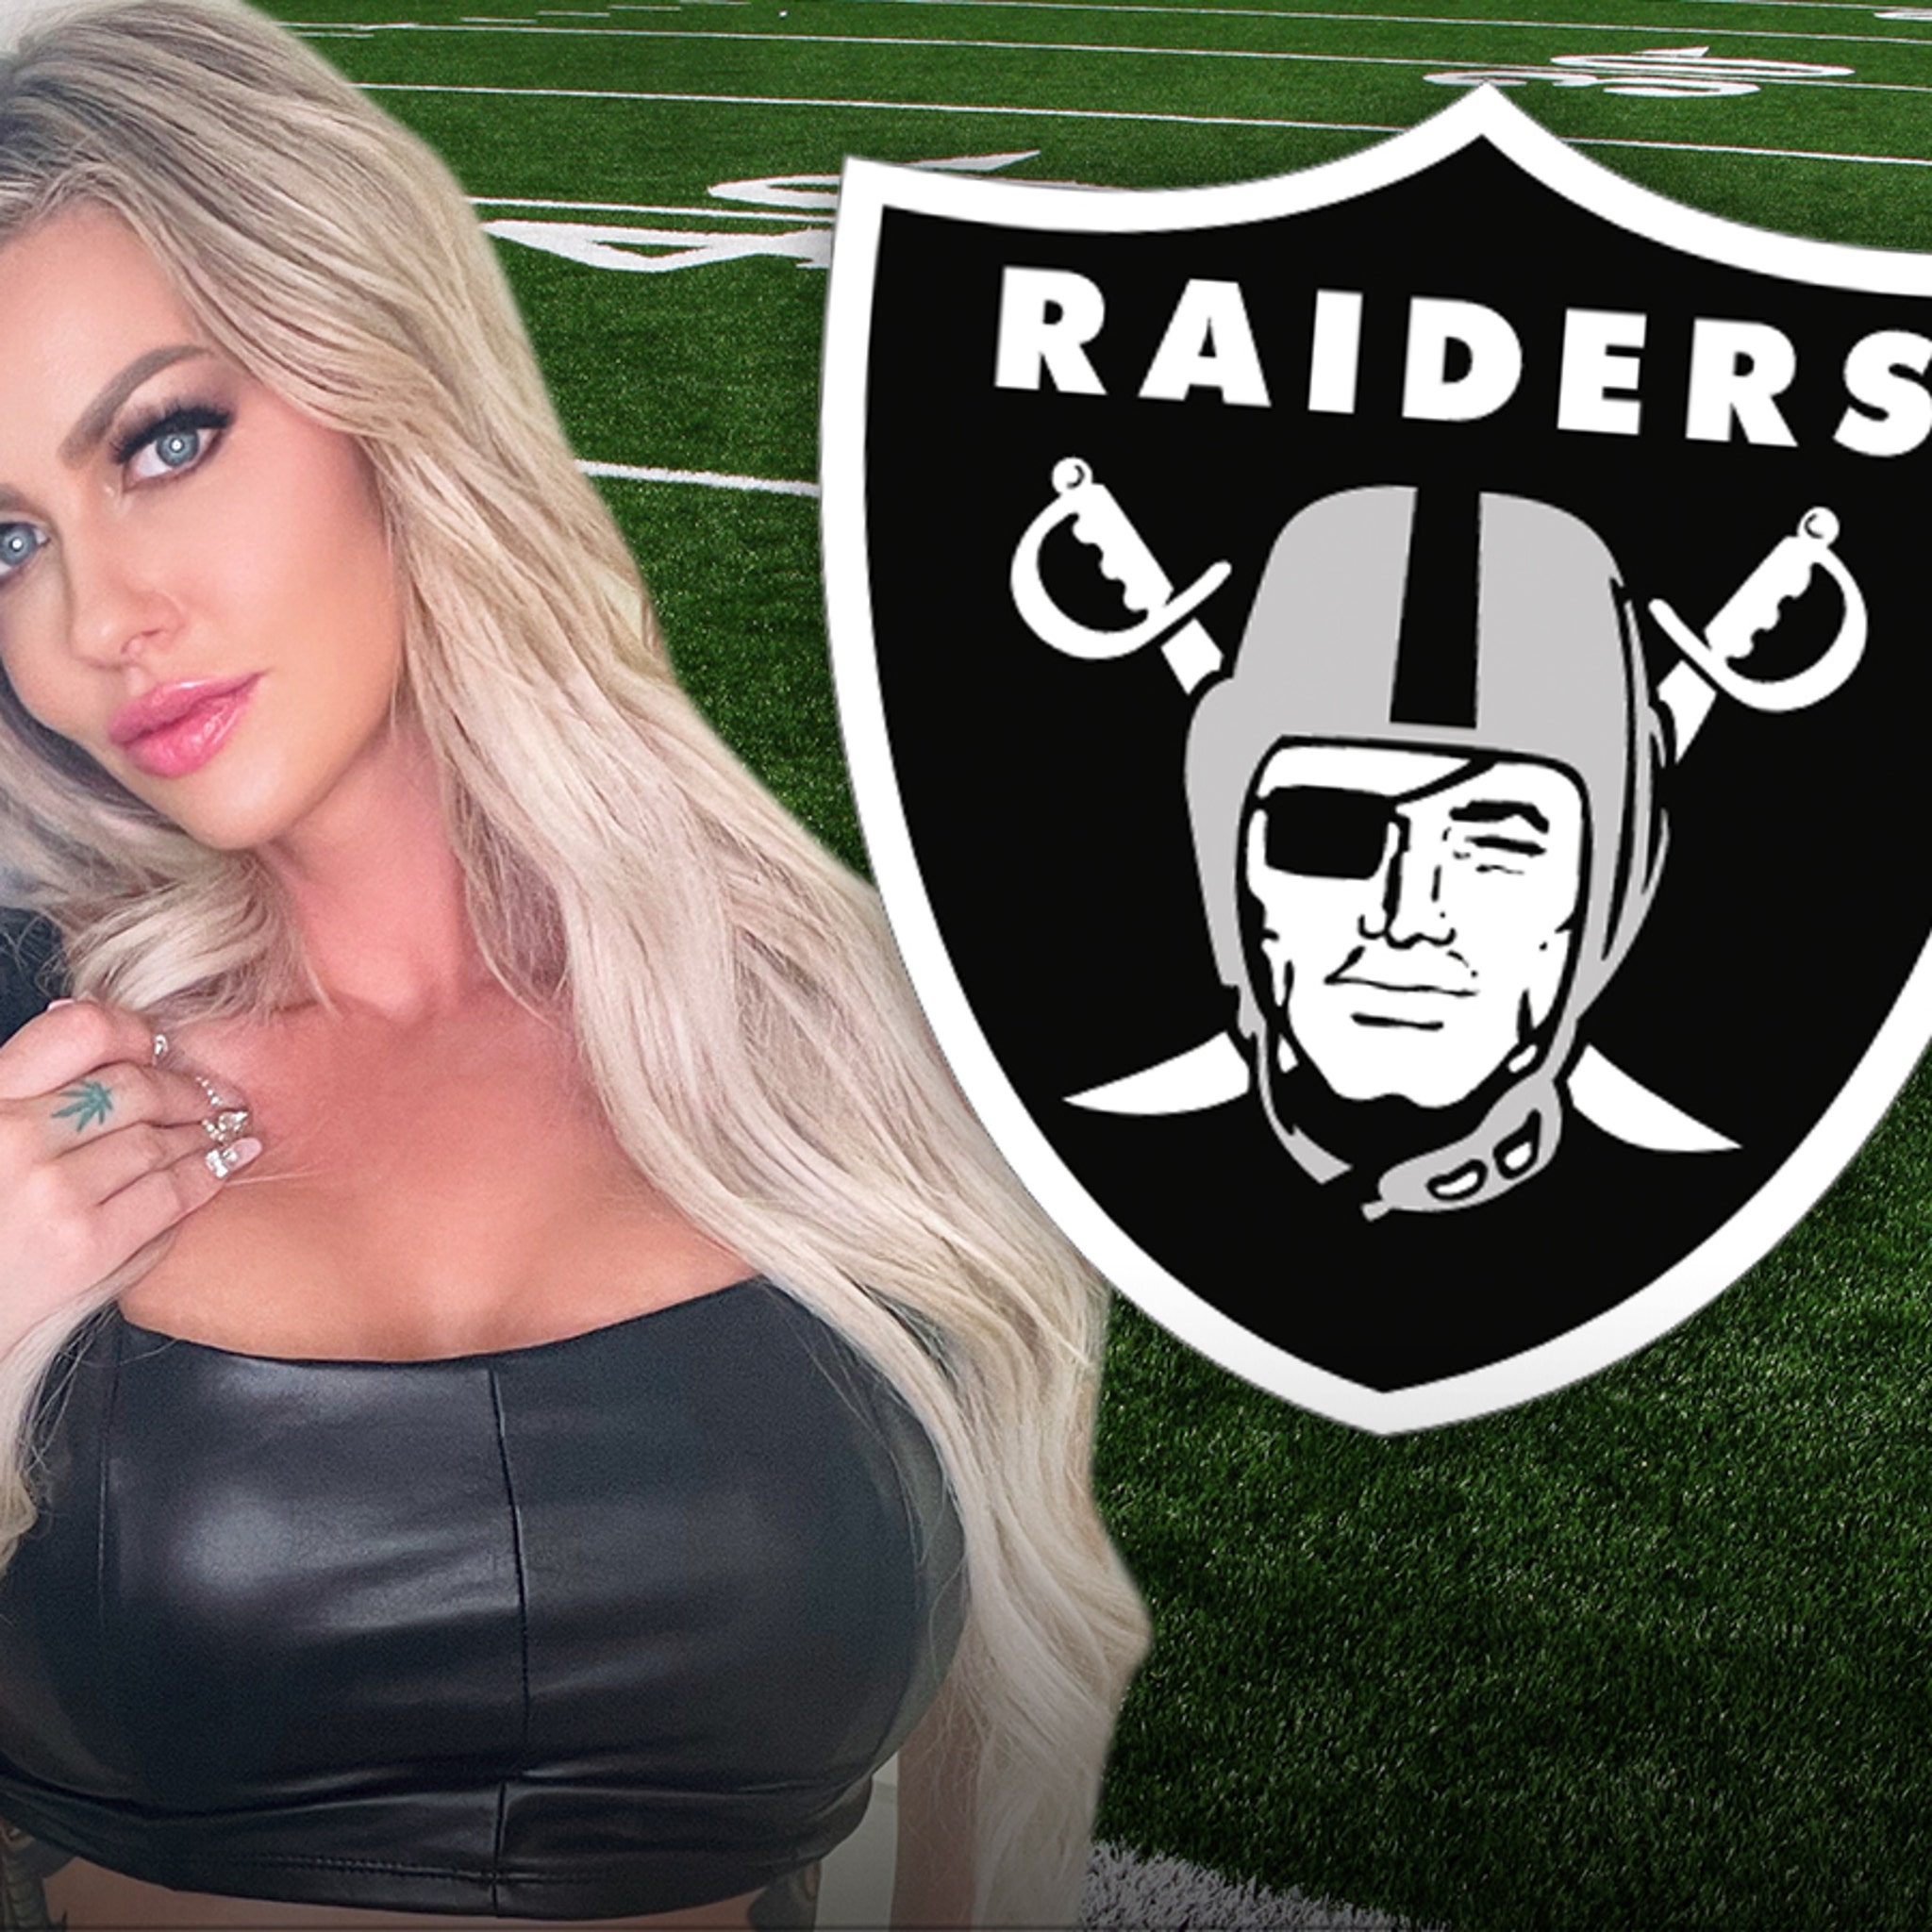 Las Vegas Sex Worker Offering Discount VIP Package To Raiders Players, Staff This Season pic